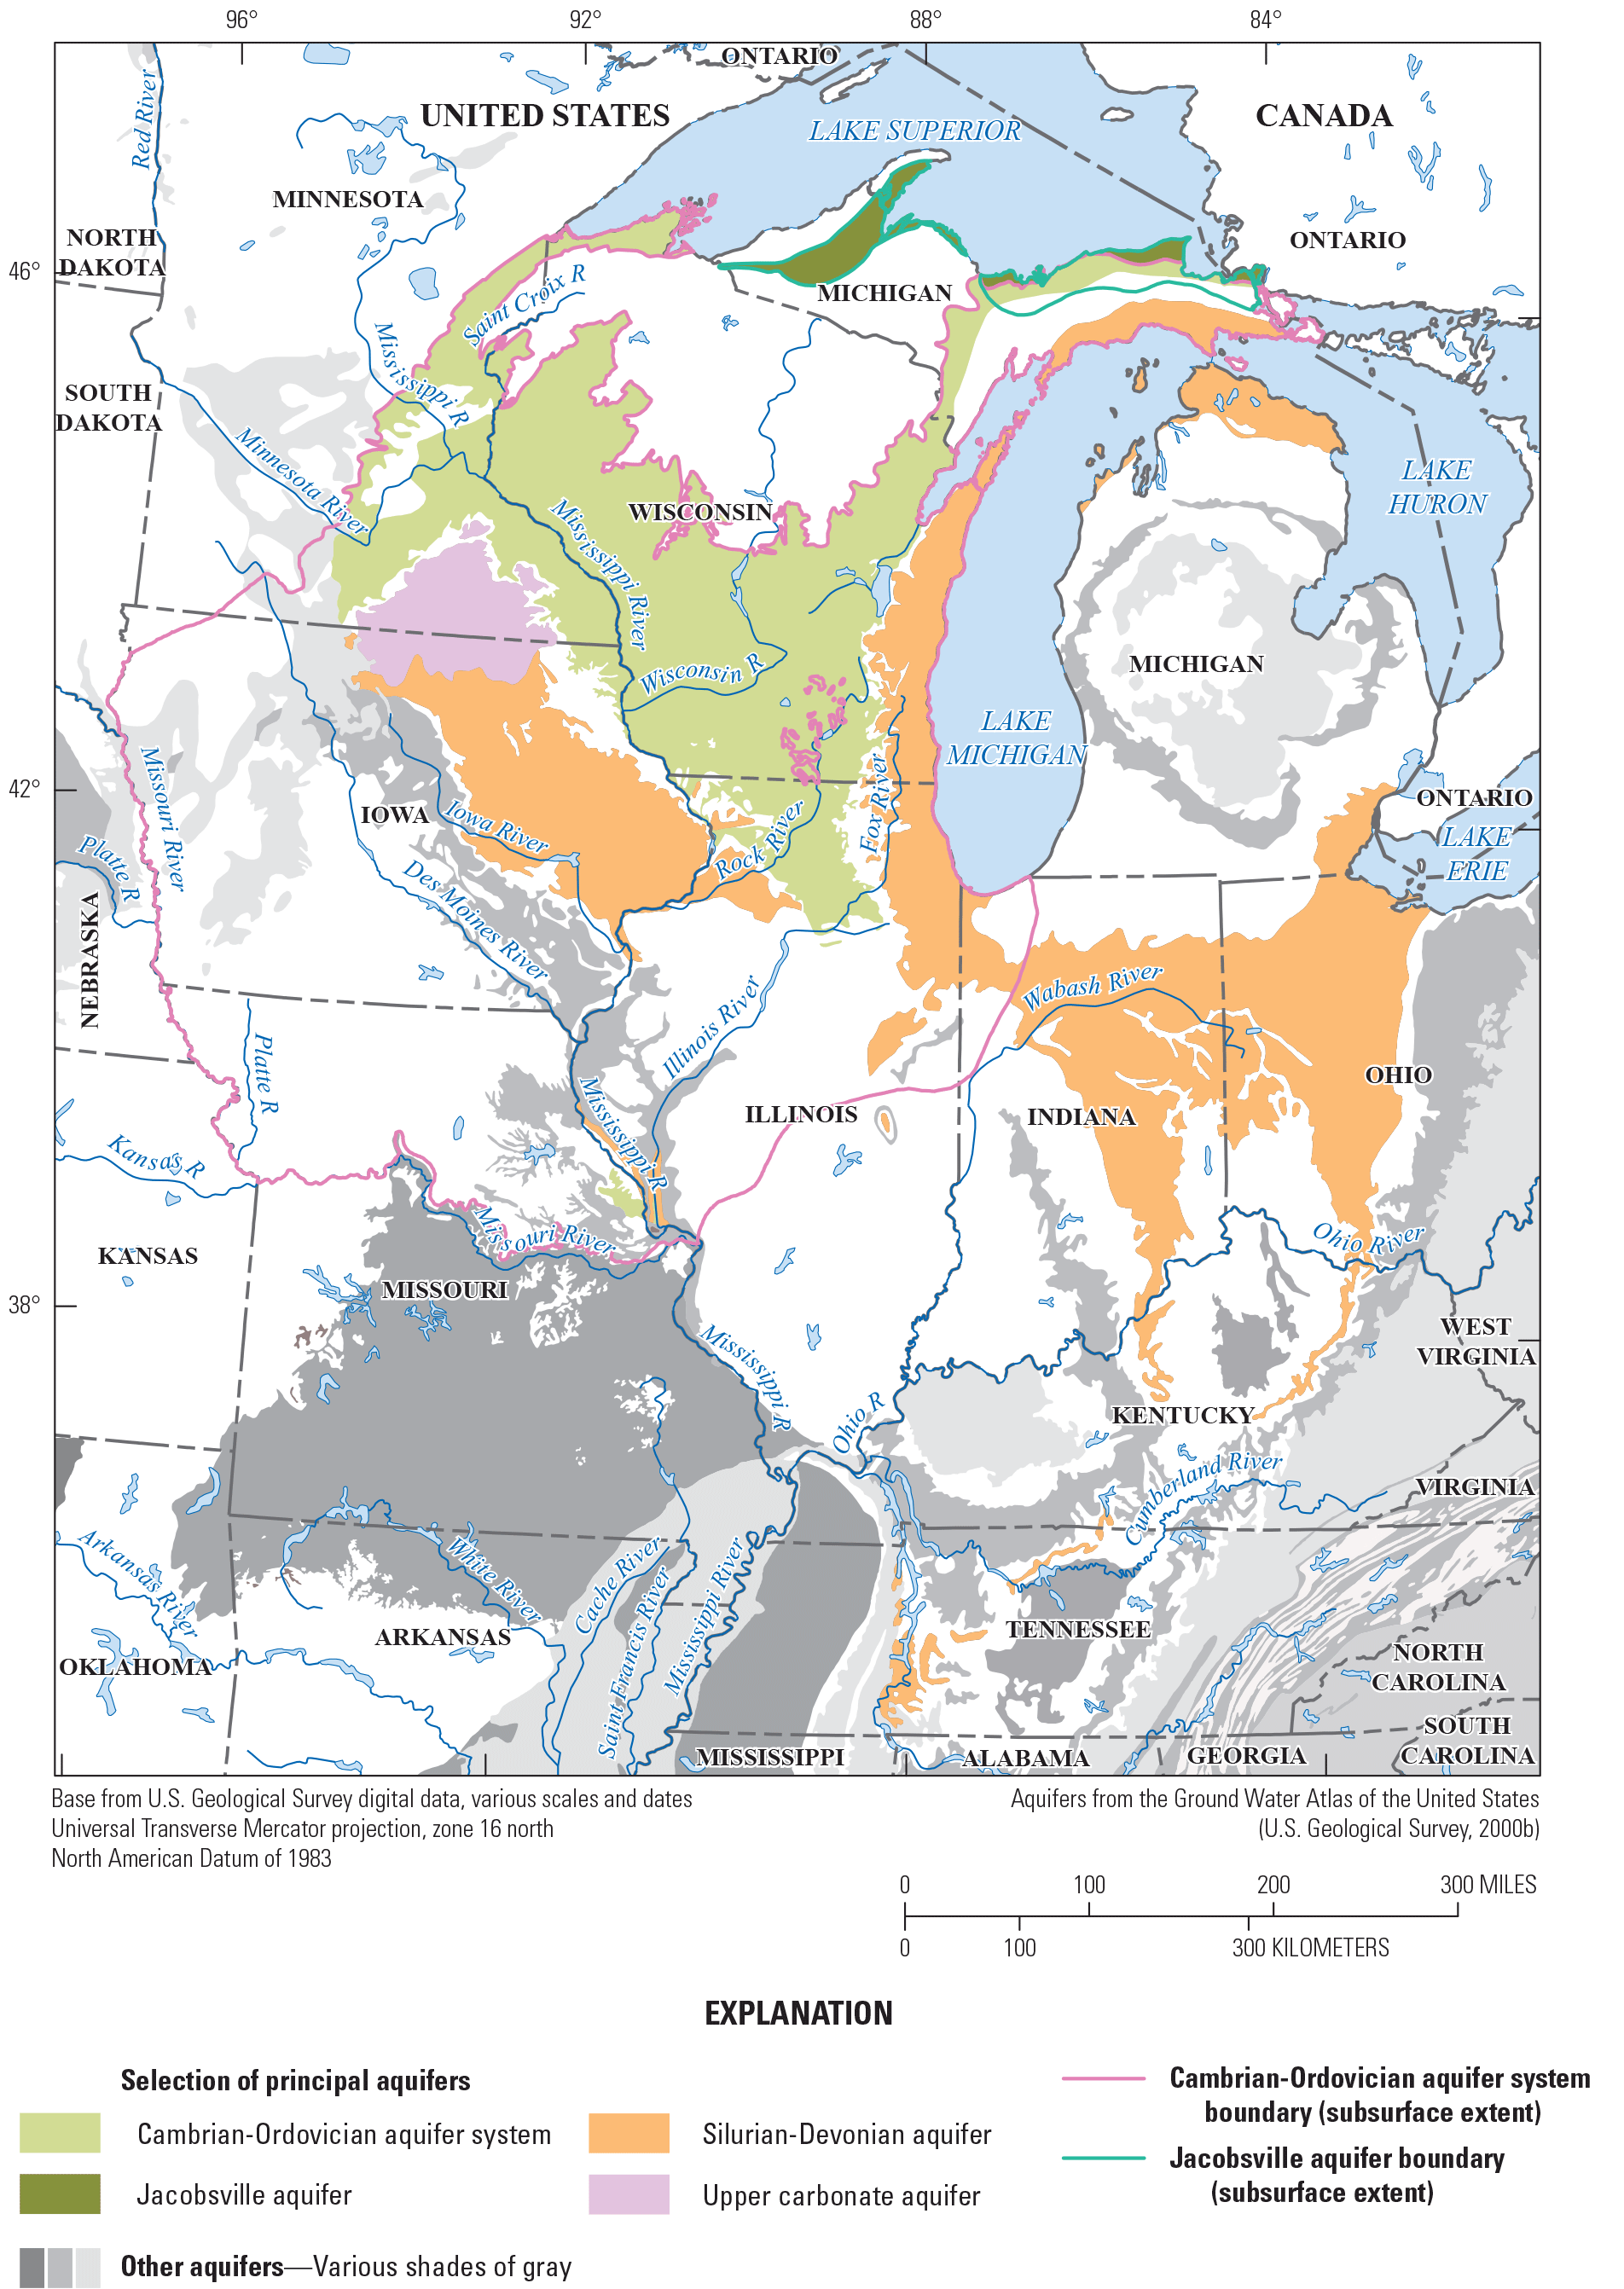 The Cambrian-Ordovician aquifer system in Minnesota, Wisconsin, Illinois, and Michigan;
                     the Jacobsville aquifer in Michigan; the Upper carbonate aquifer in Minnesota and
                     Iowa; and the Silurian-Devonian aquifer in Iowa, Wisconsin, Illinois, Michigan, Indiana,
                     and Ohio.